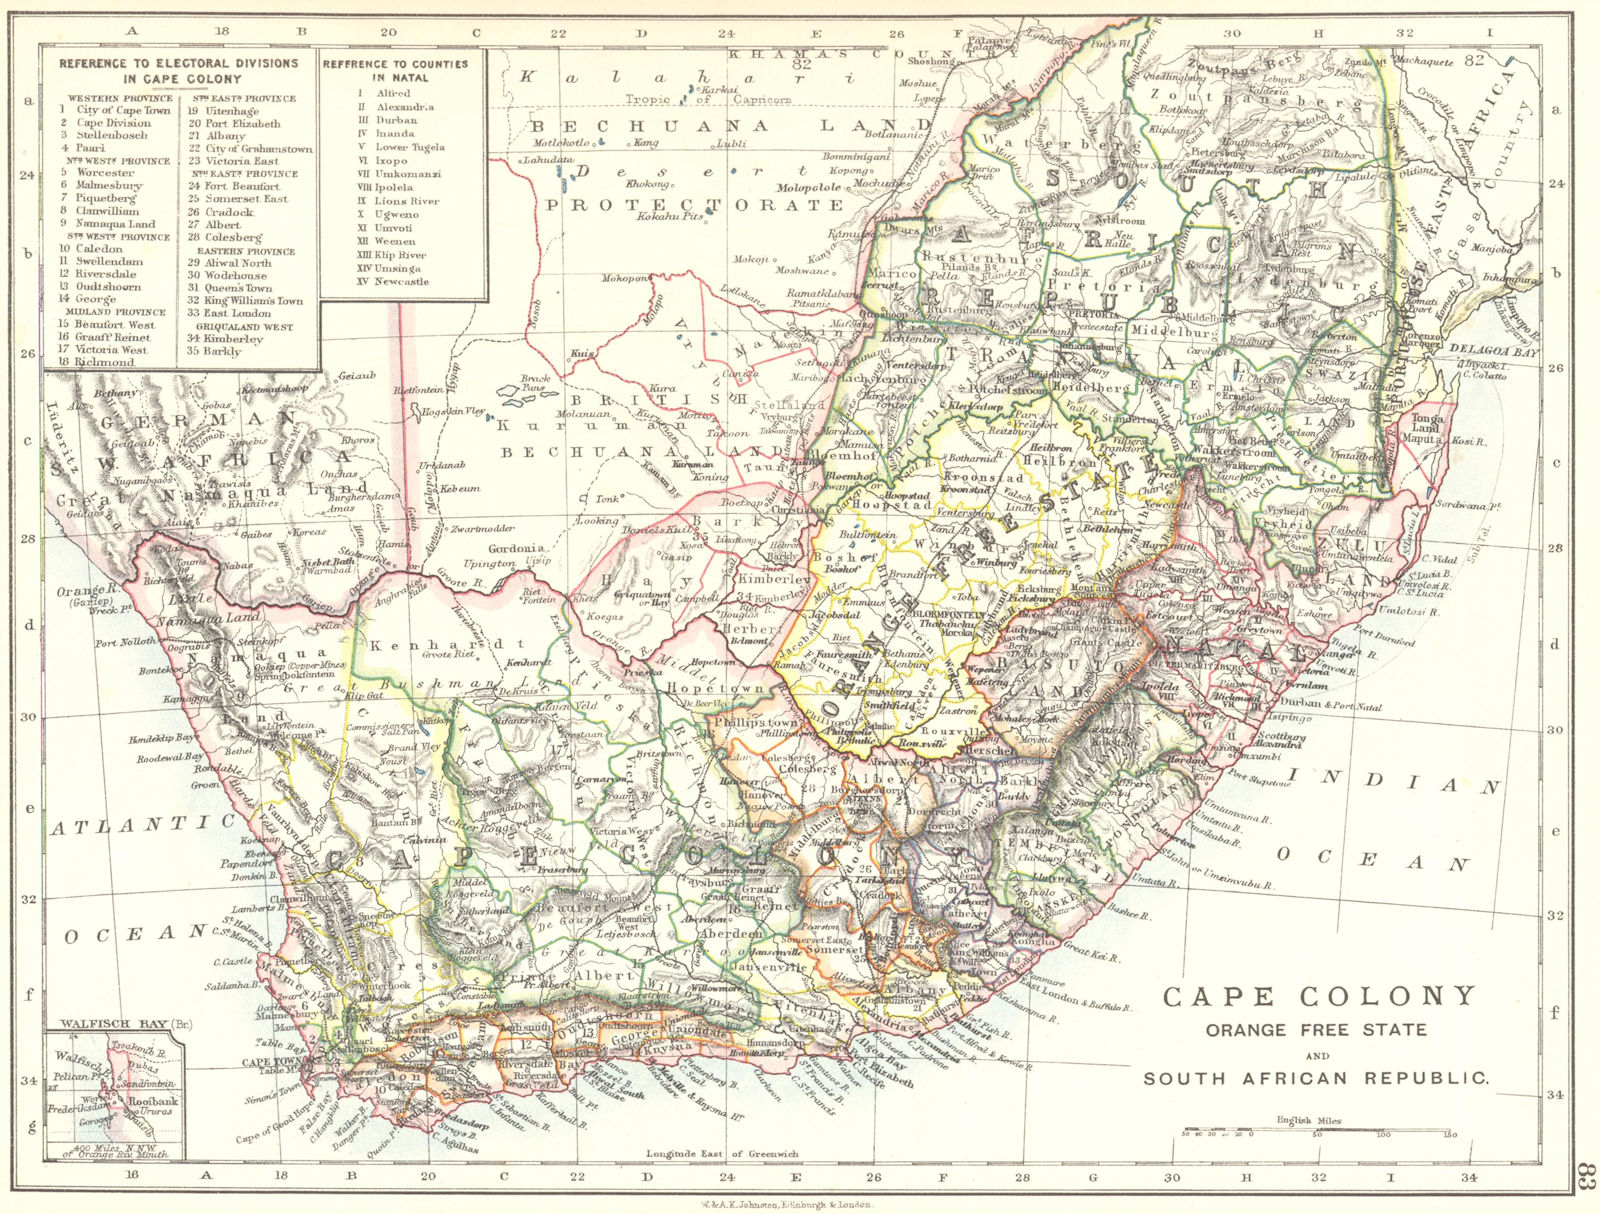 COLONIAL SOUTH AFRICA. Cape Colony. Orange Free State. SA Republic 1899 map